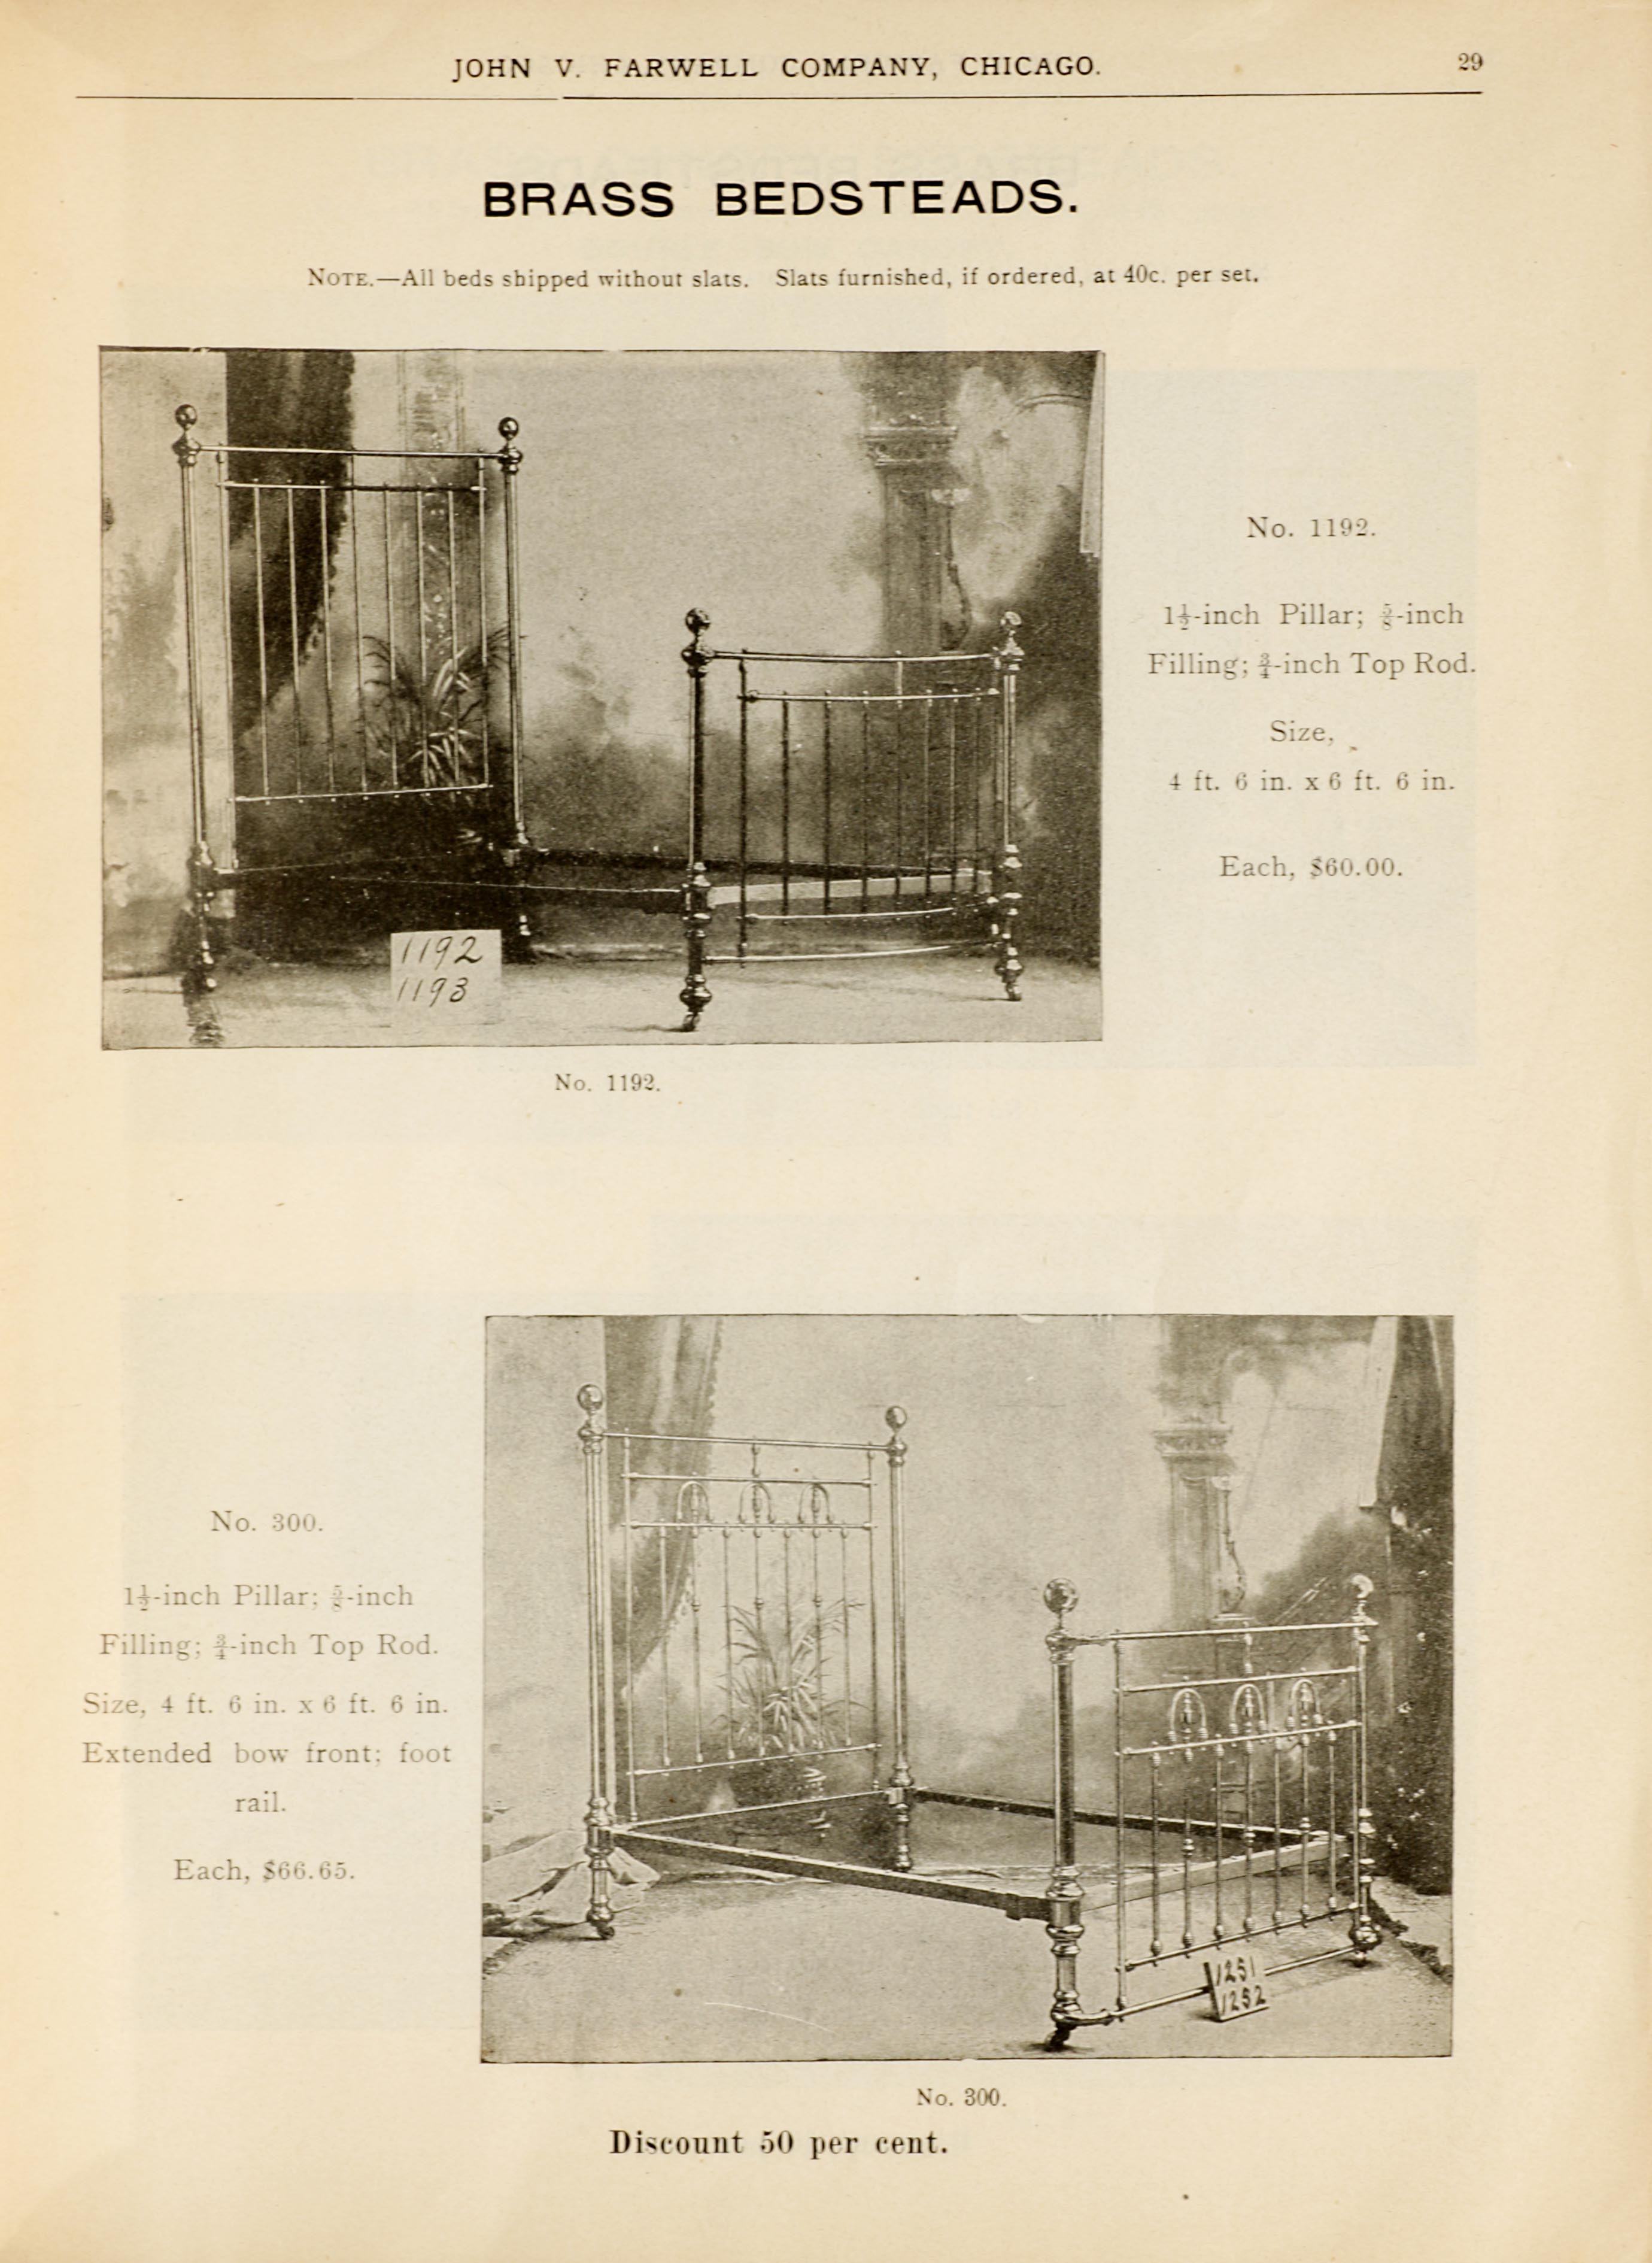 John V. Farwell Iron Bed Catalog, Chicago 1895- Page 21